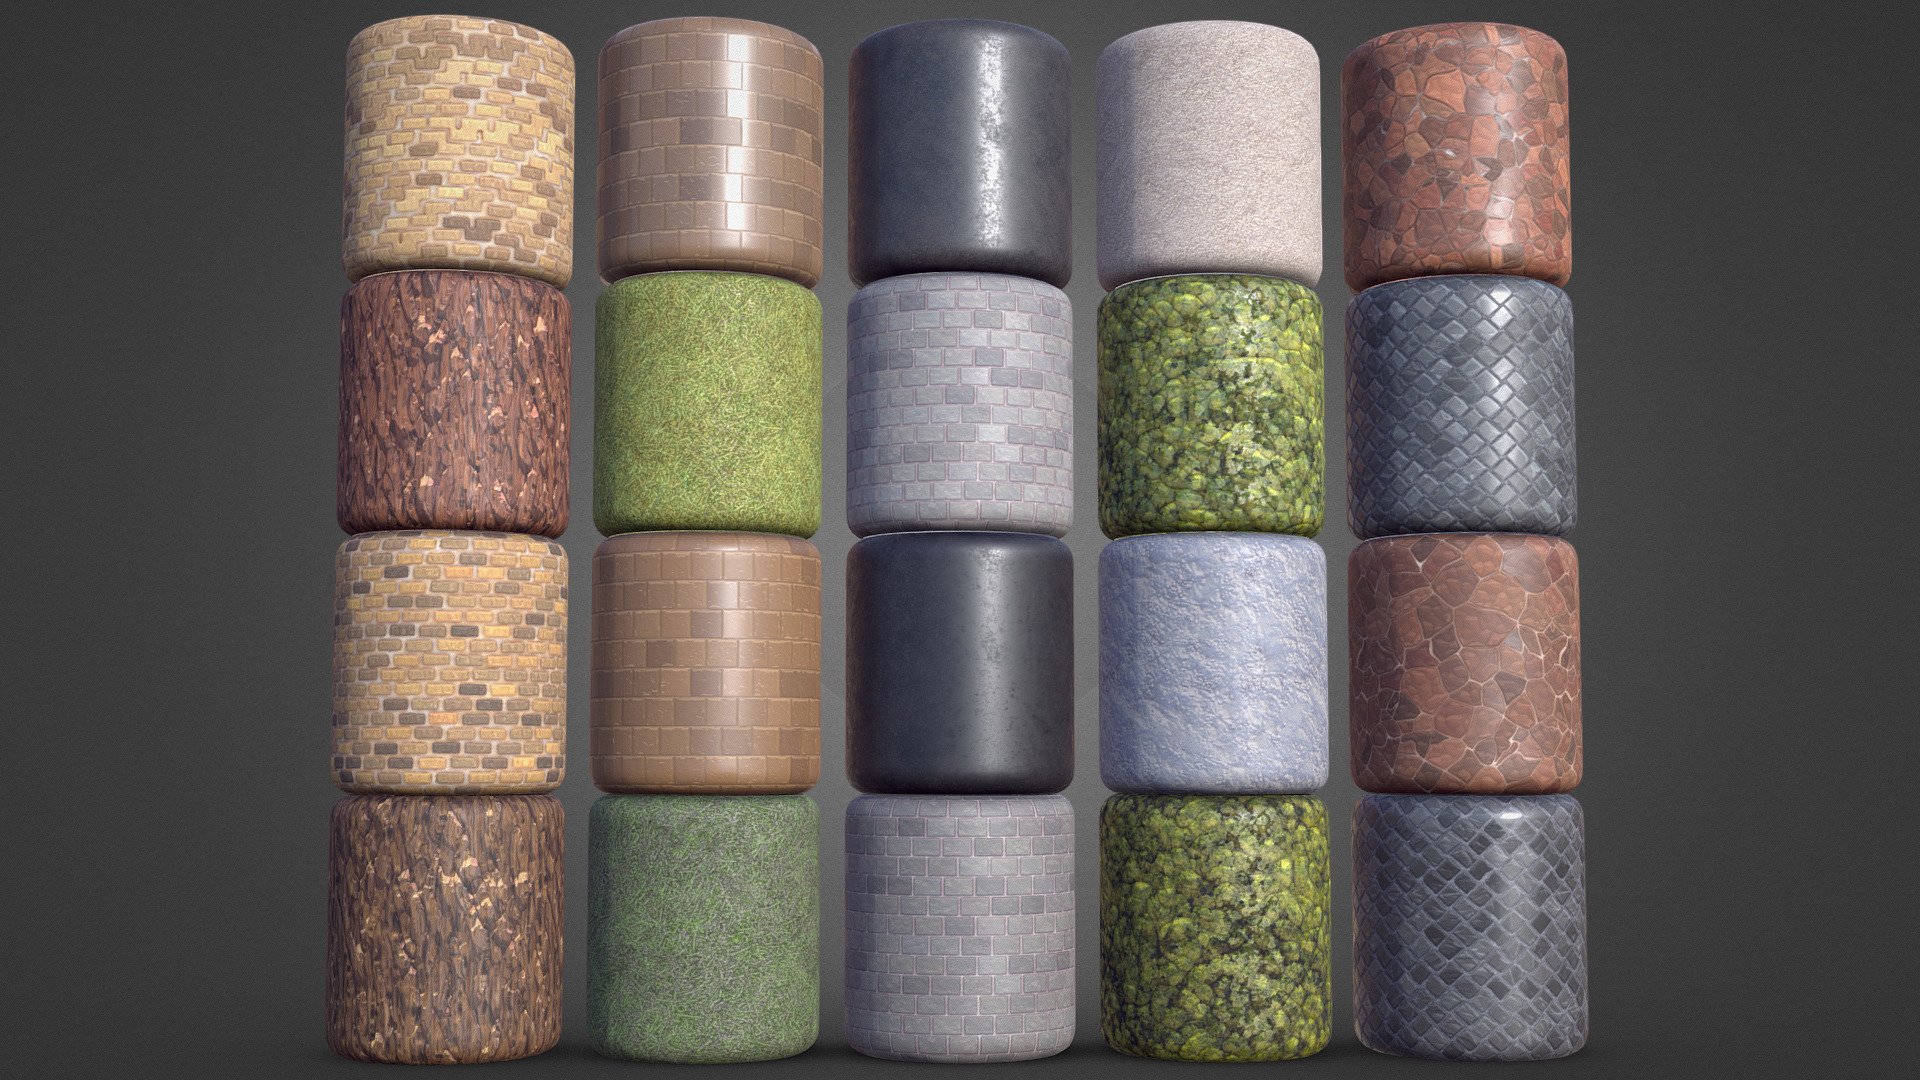 Some textures I made in Substance Designer for a Ludum dare game I worked on with https://twitter.com/Weaver_Dev and https://twitter.com/Wabbaboy
The game didn't see it through tho, but I hope you'll find them usefull! - LD Textures - Download Free 3D model by soidev 3d model